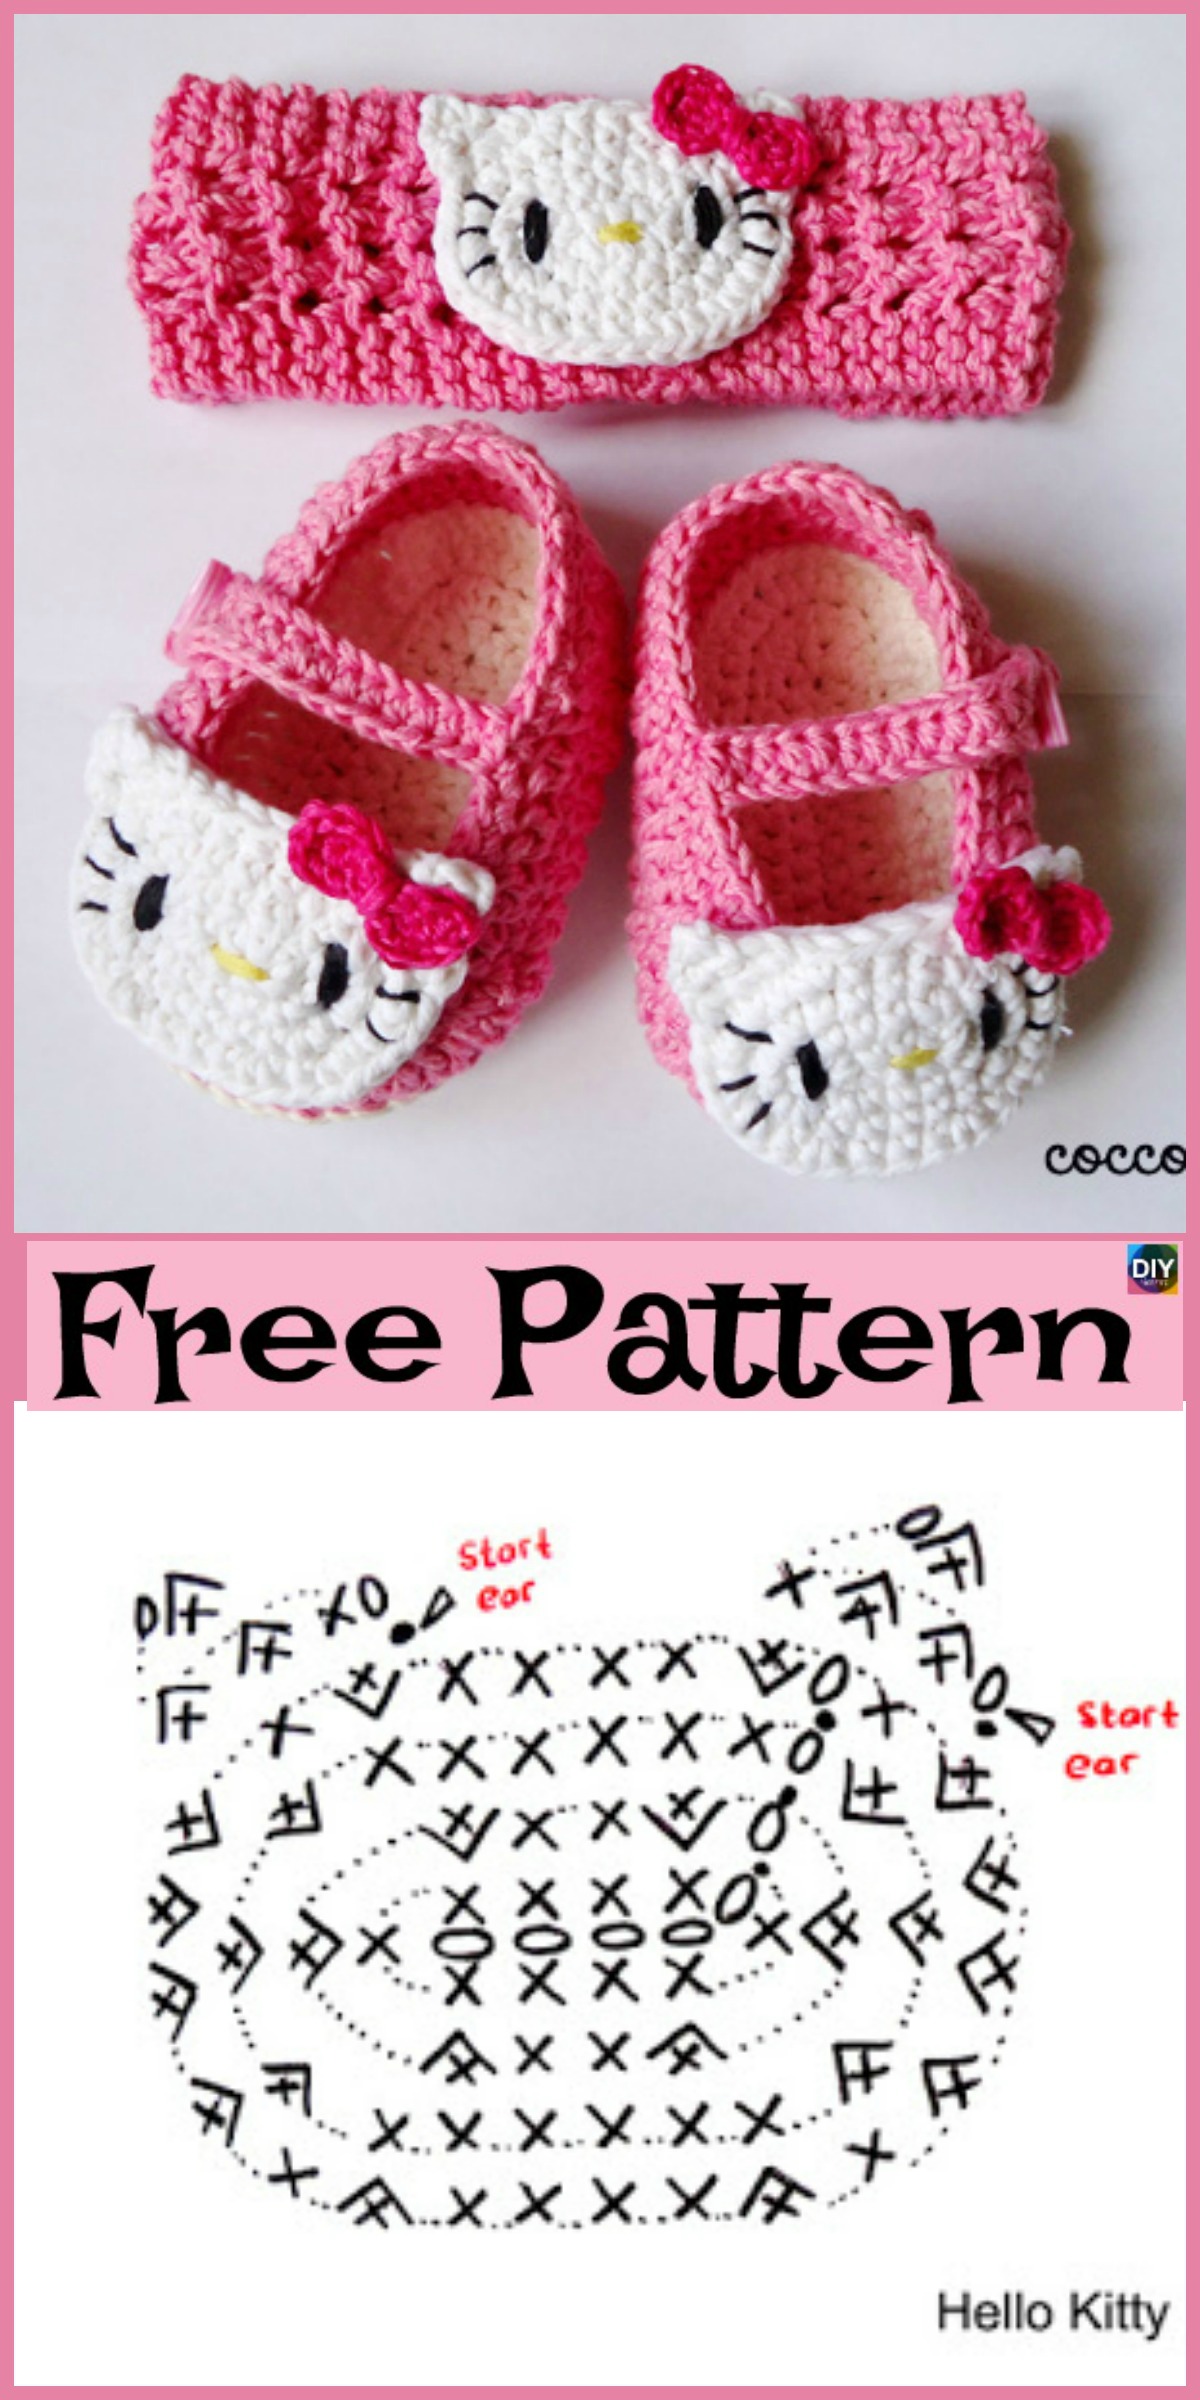 diy4ever-Cute Crocheted Baby Shoes - Free Patterns